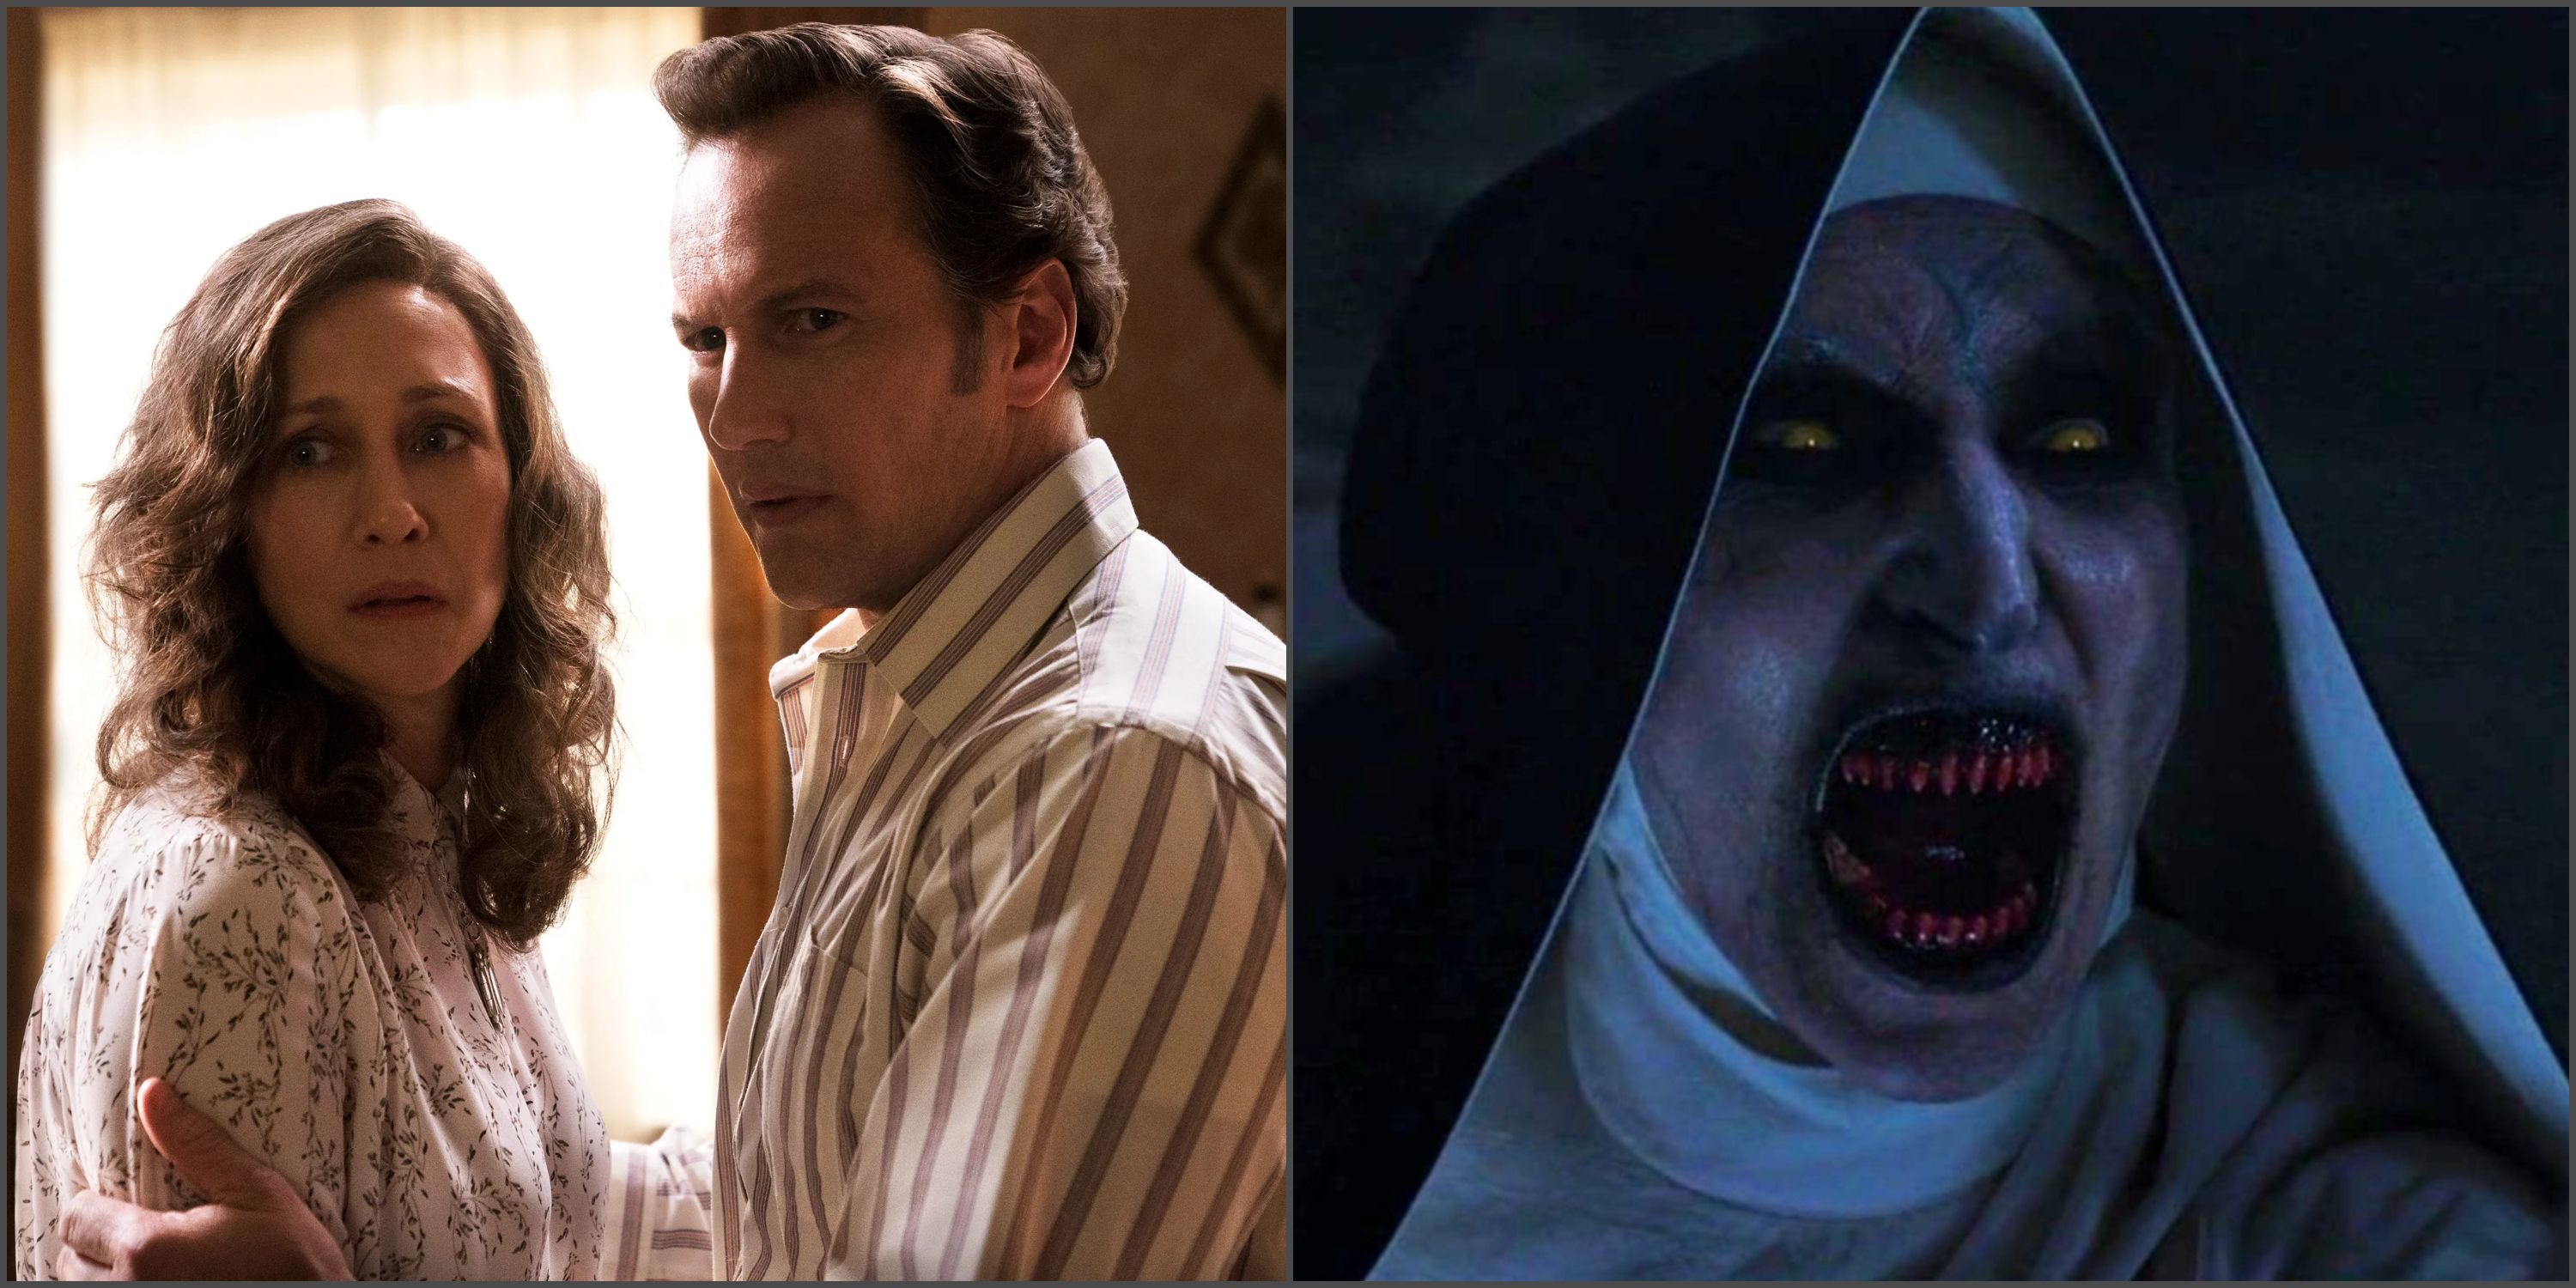 The Nun 2 and The Conjuring - Ed and Lorraine Warren and Valak the Nun screaming